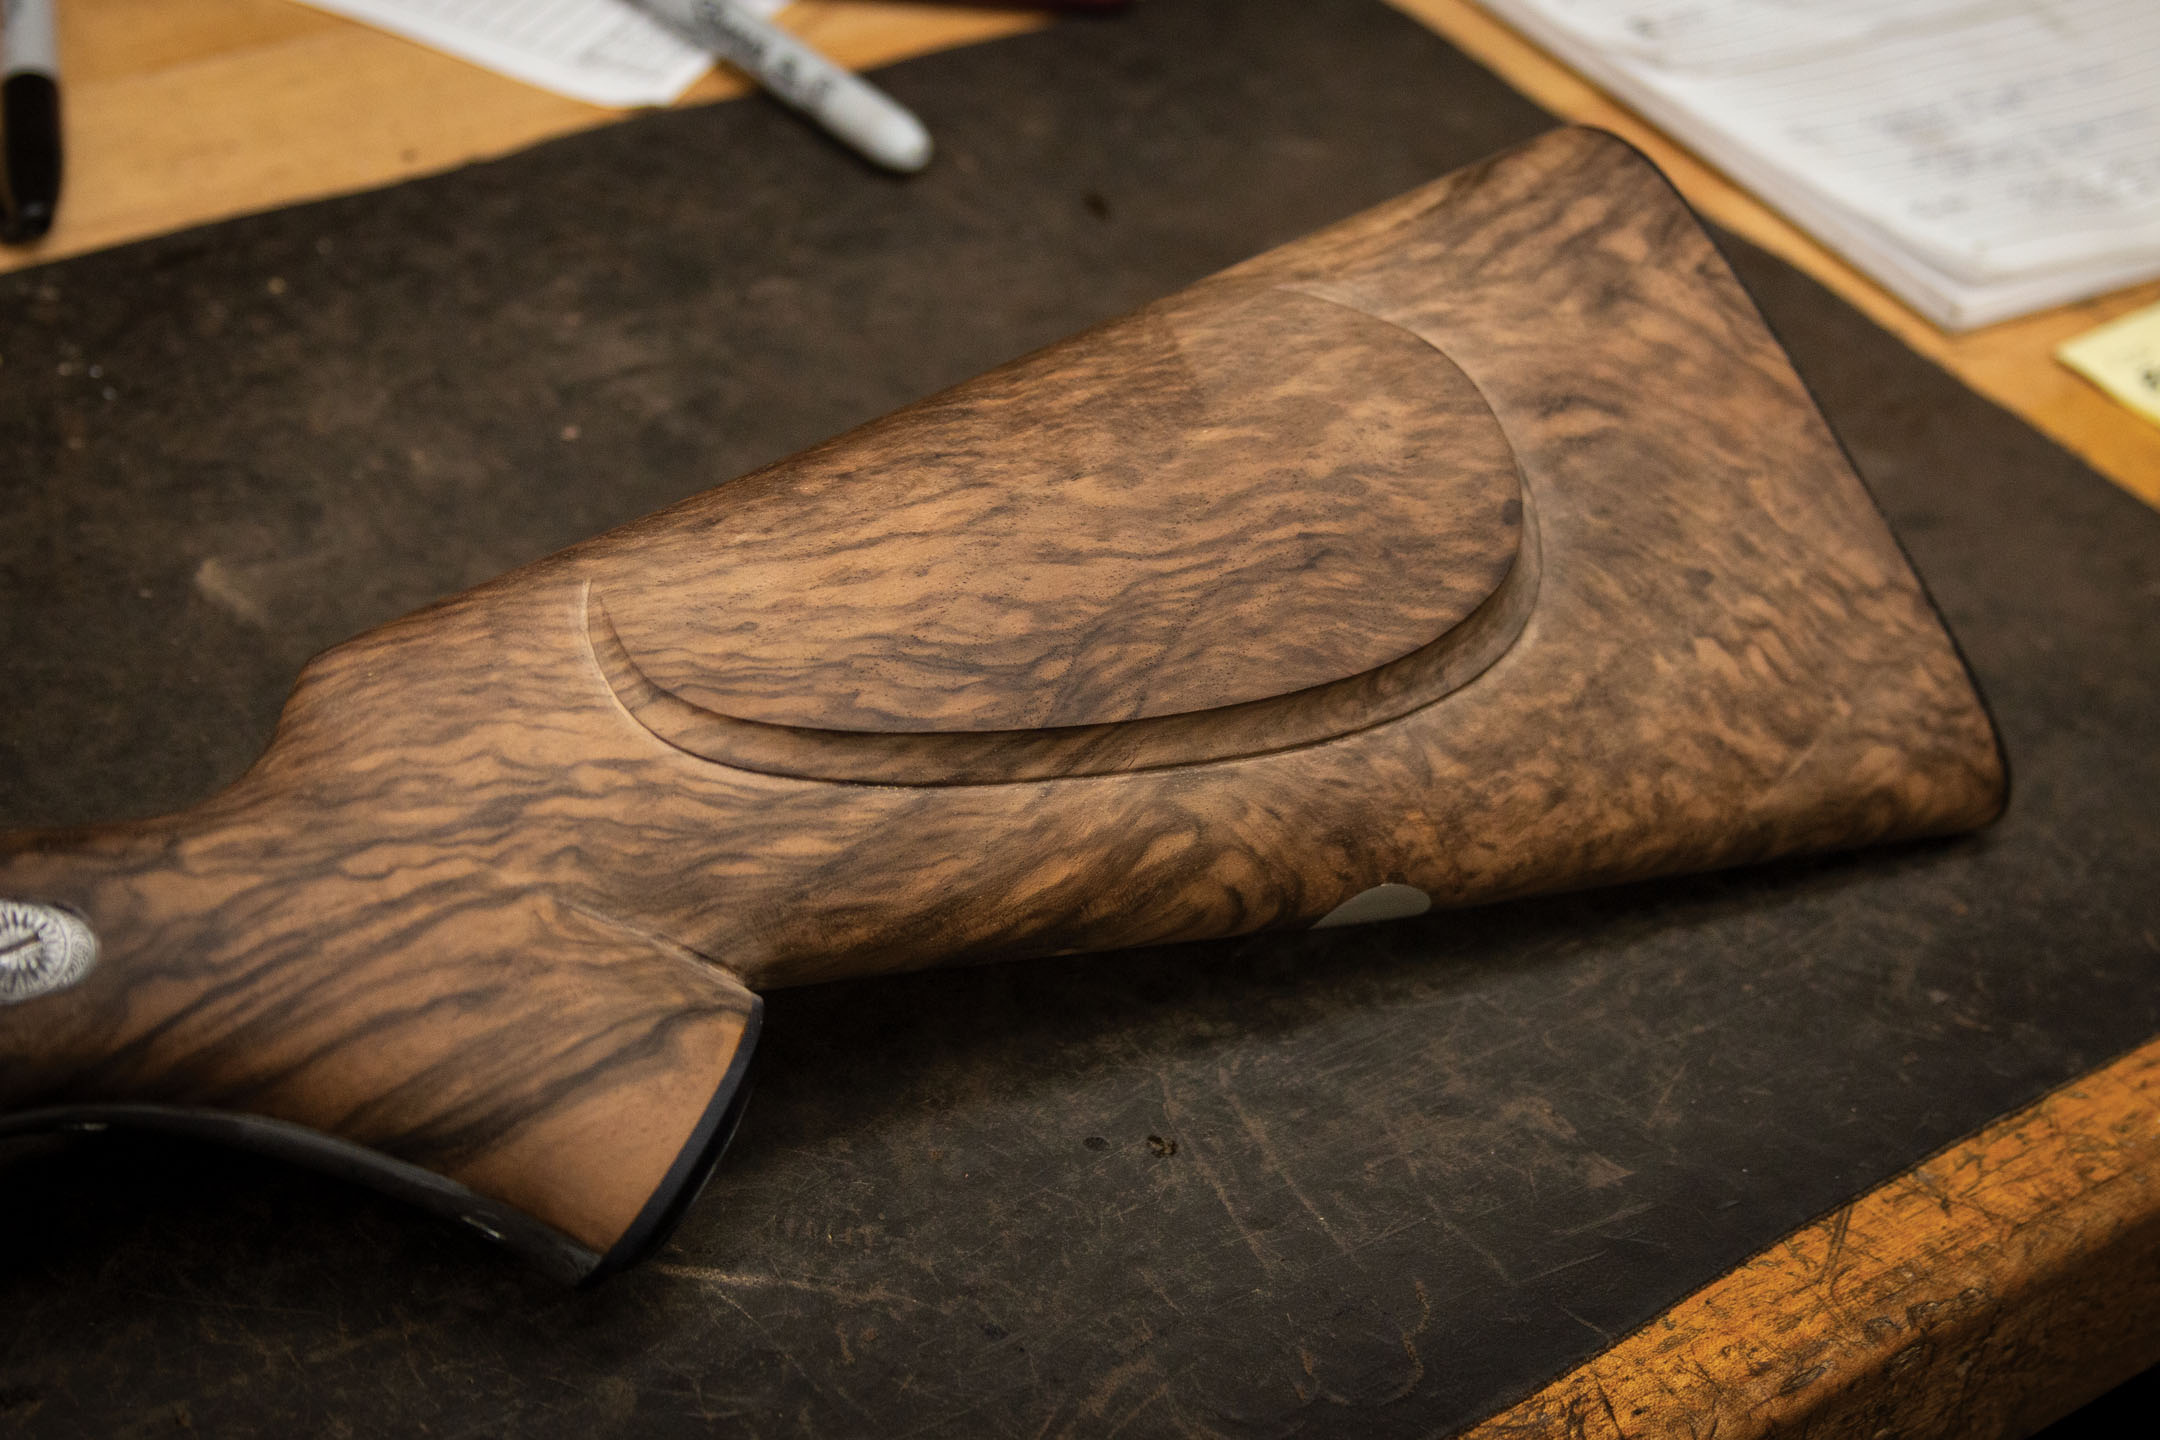 New stocks completed during an A. Hollis & Son double rifle restoration project